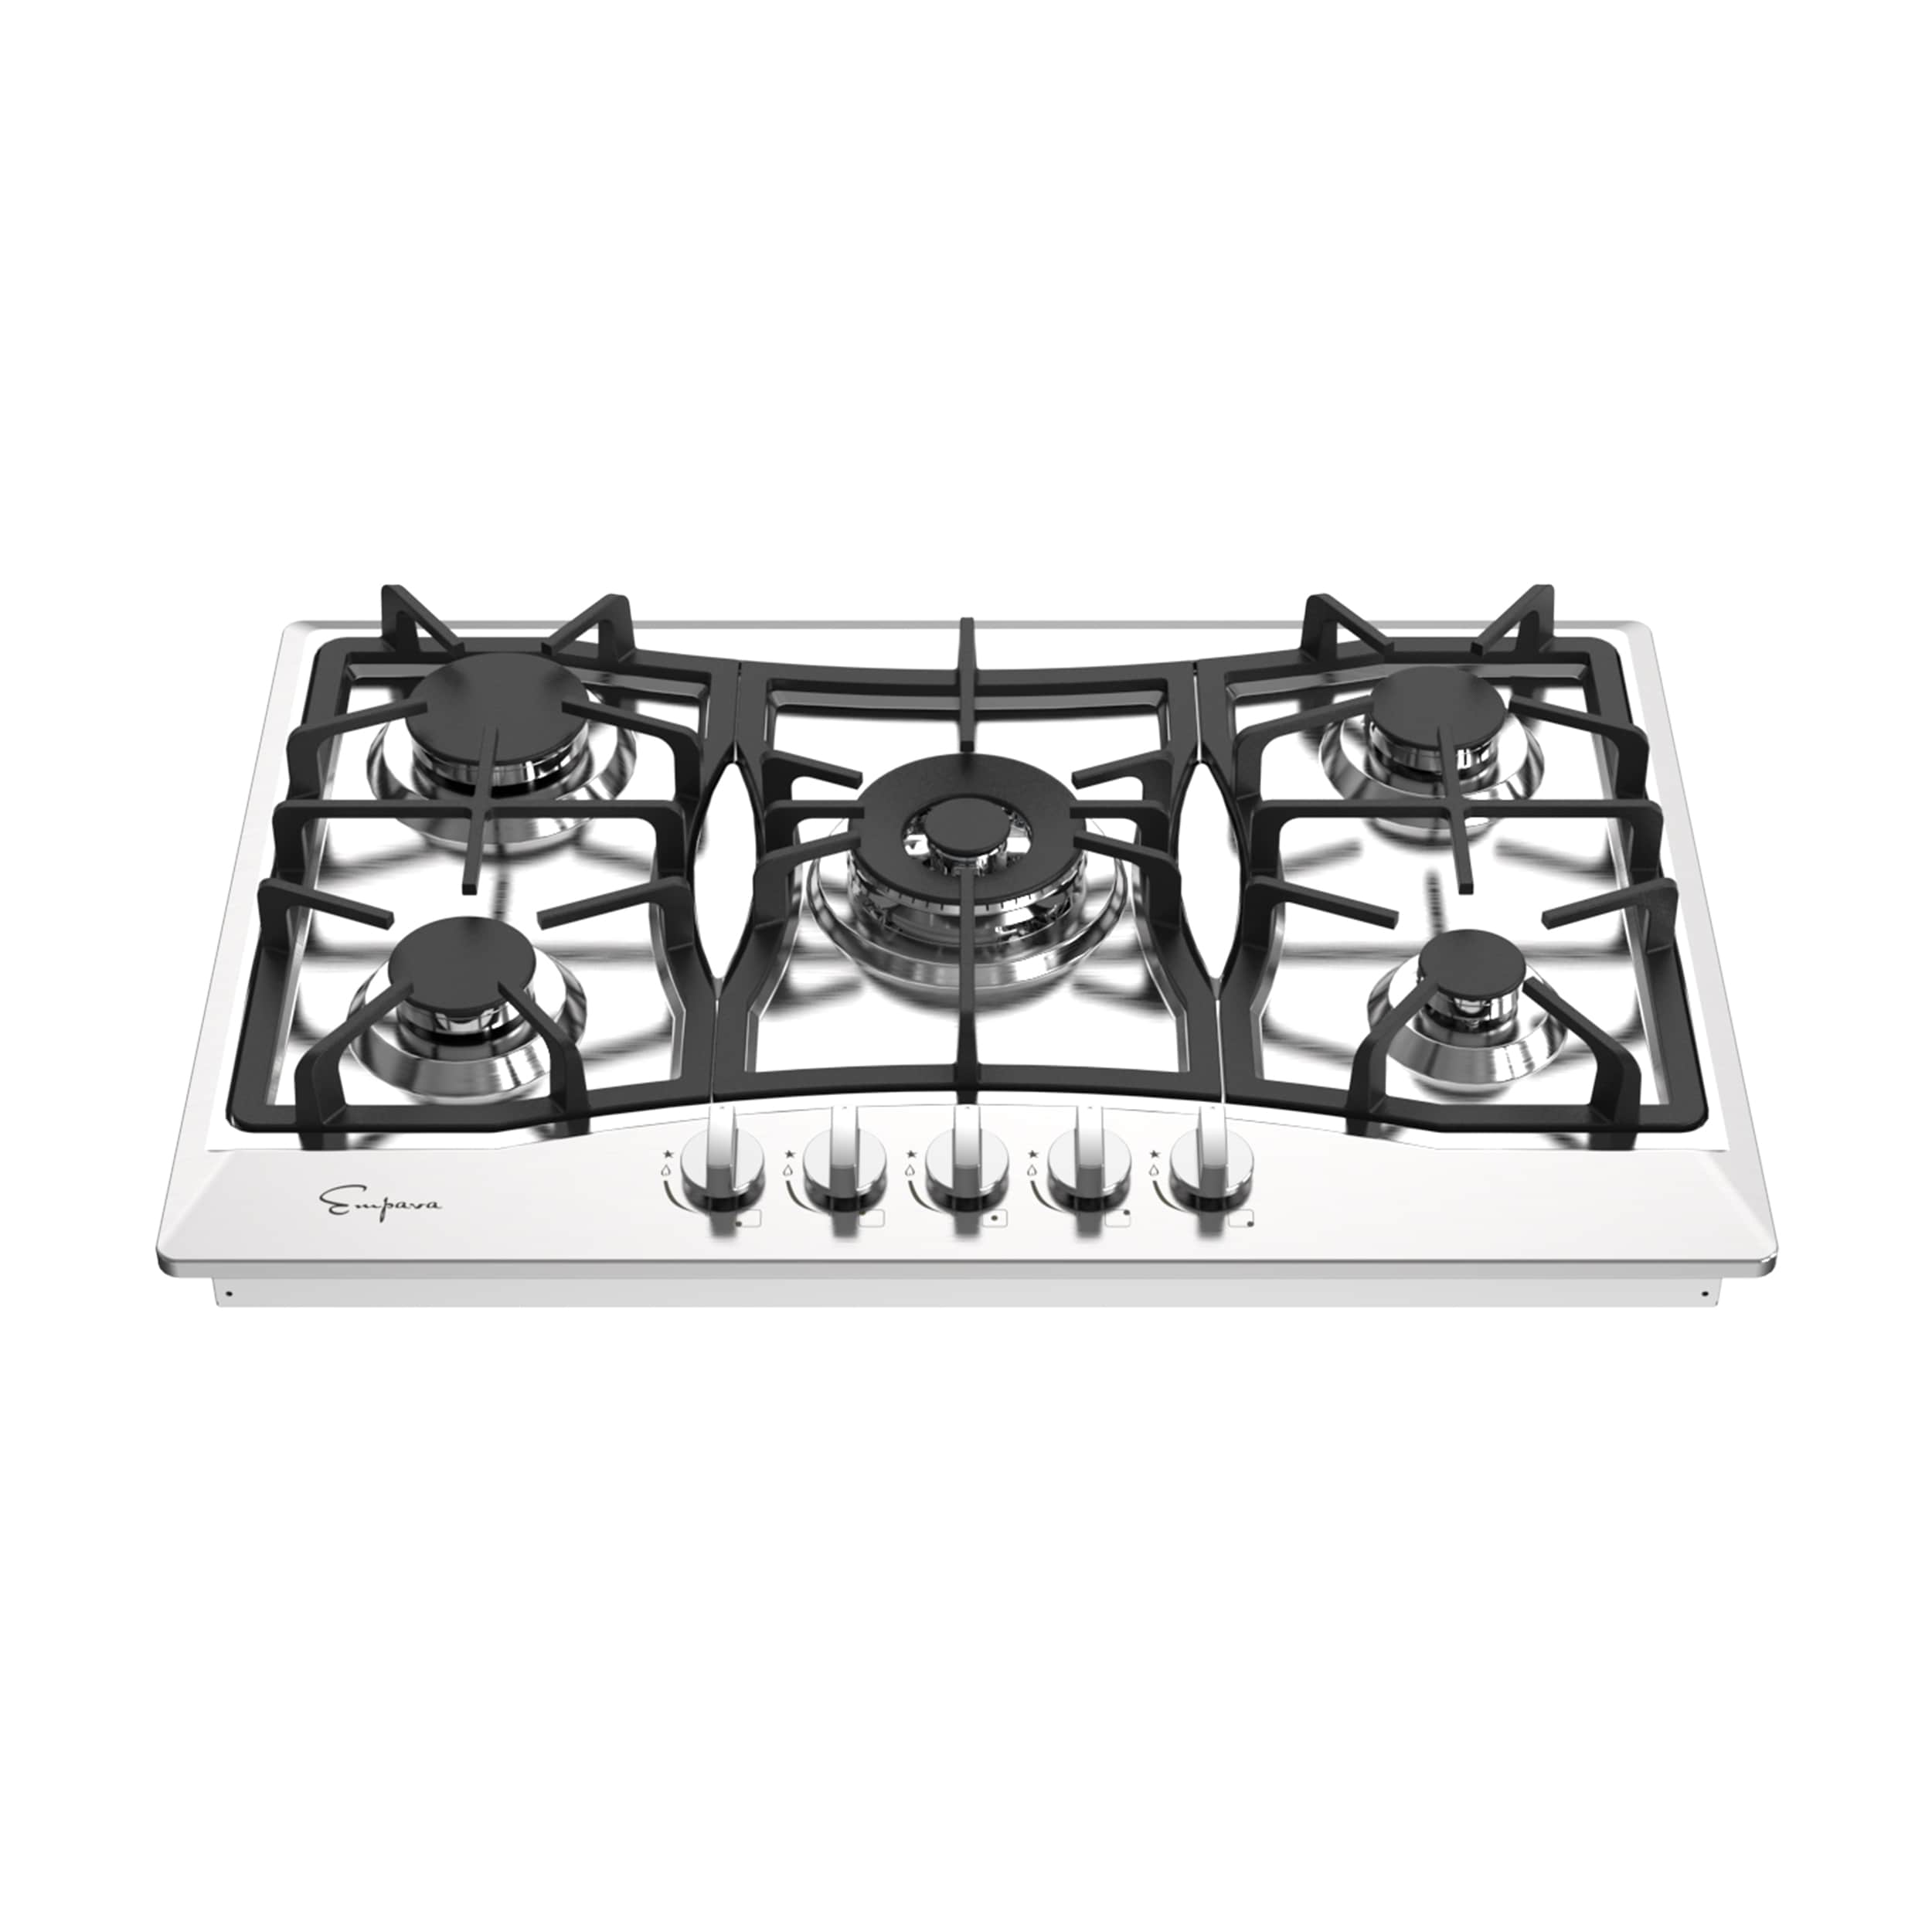 Empava 30 Stainless Steel 5 Italy Sabaf Burners Stove Top Gas Cooktop EMPV-30GC0A5 